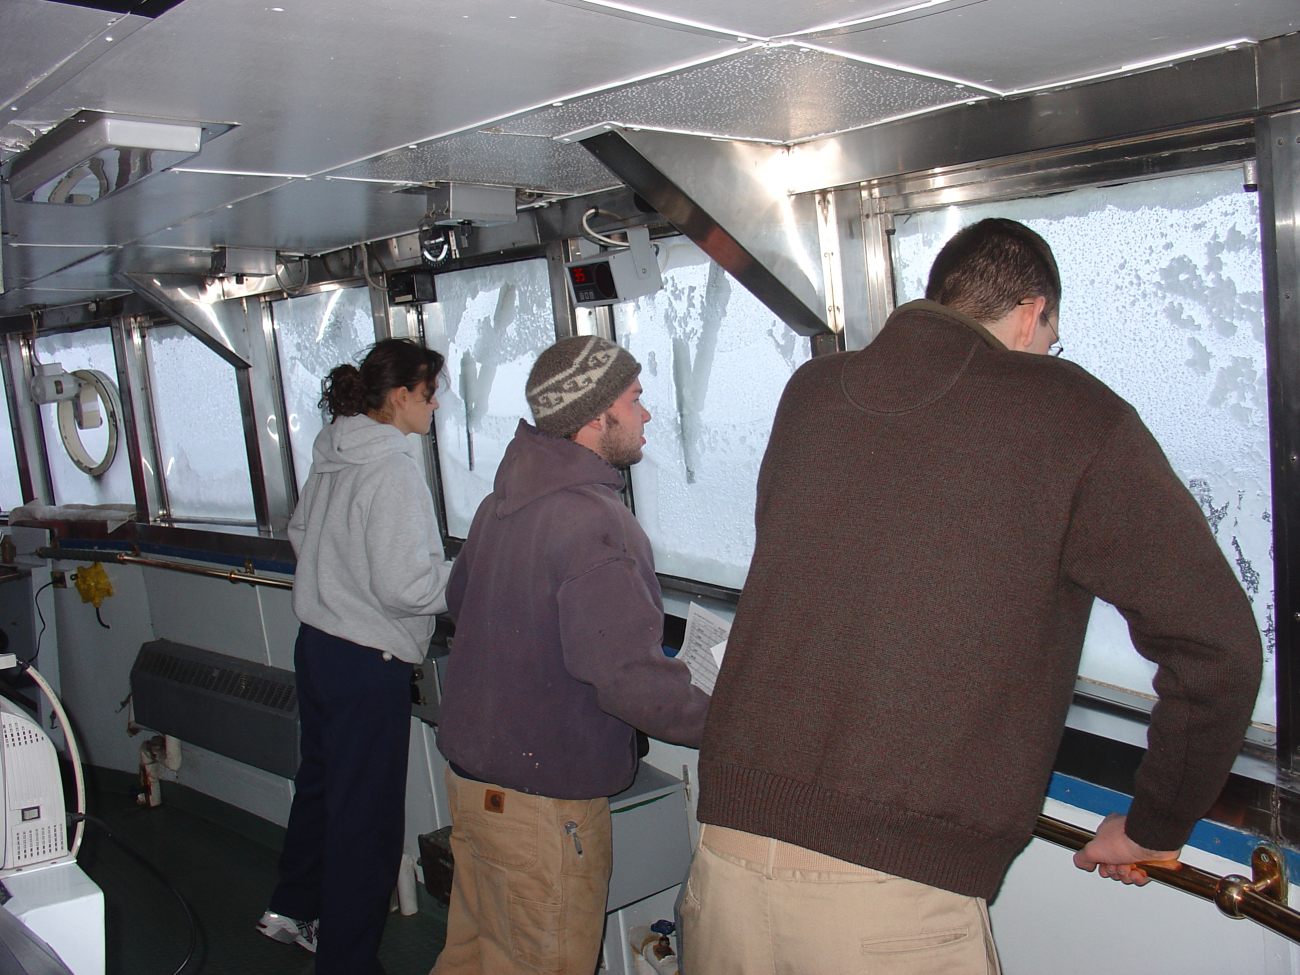 Maintaining lookout during icing event on NOAA Ship MILLER FREEMAN